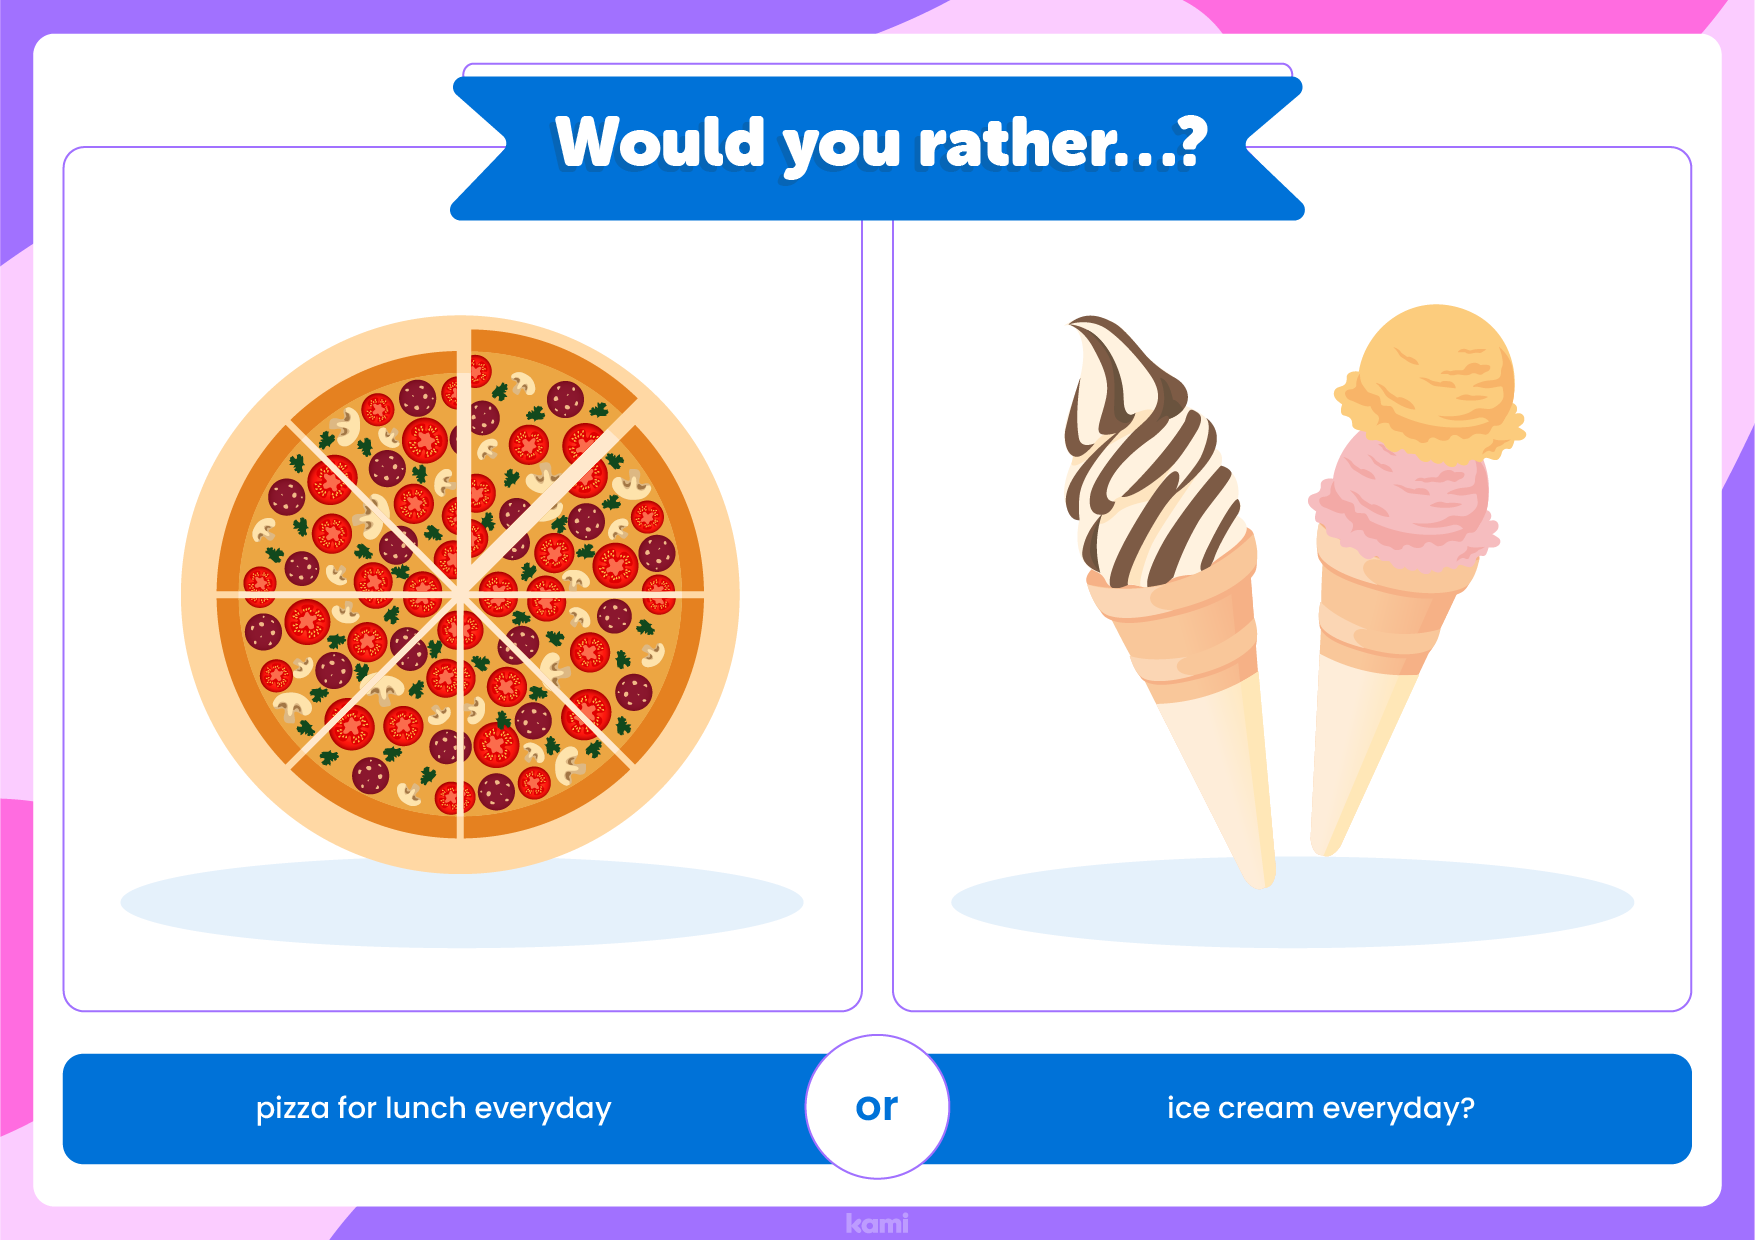 A back to school activity for icebreakers with a would you rather game.